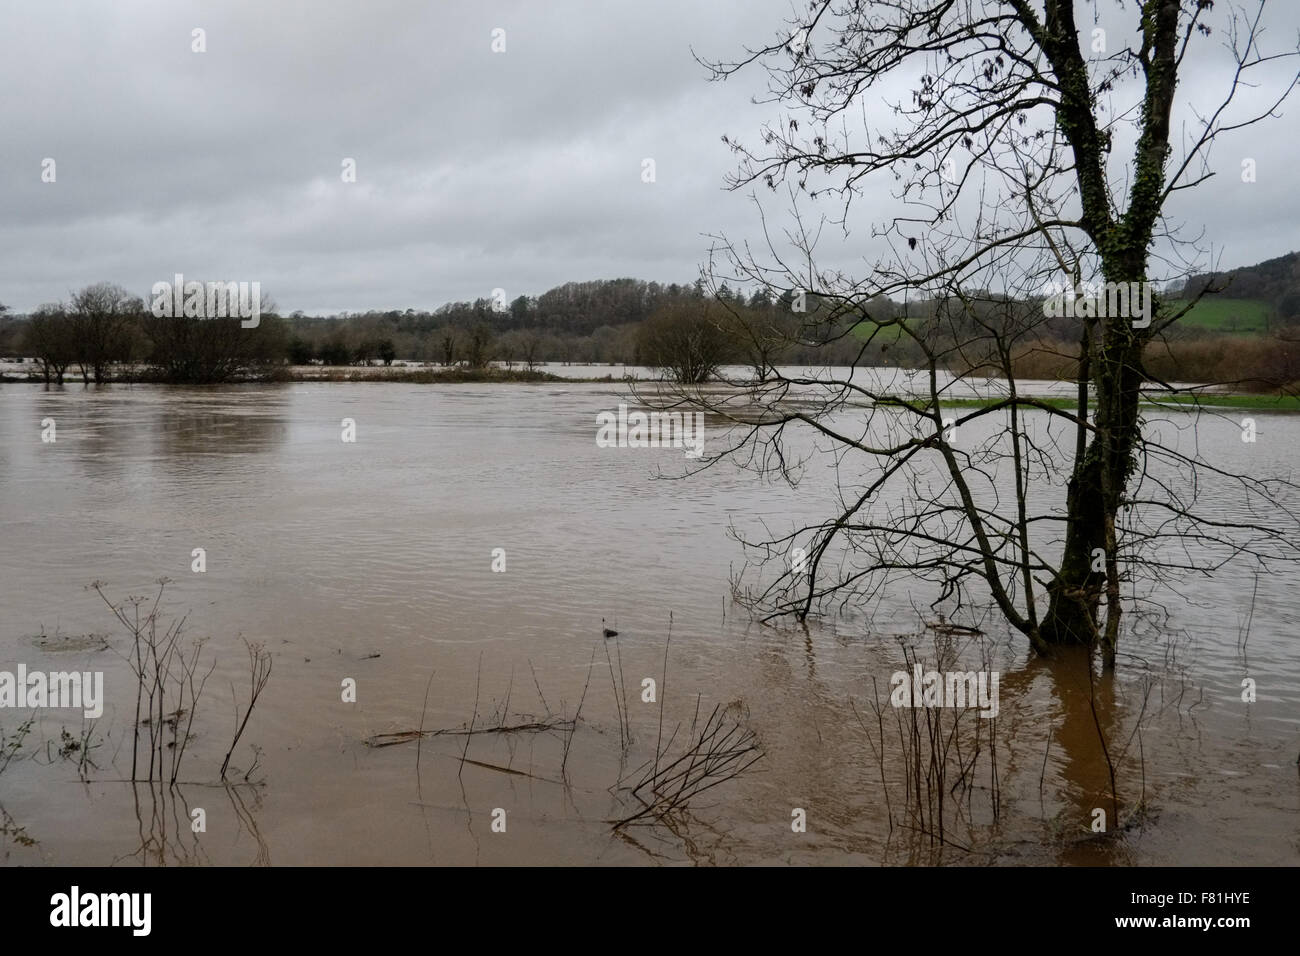 South Wales, UK. 4th December 2015. Prolonged rain falling on saturated land has left low lying agricultural areas flooded. The river Towy bursts its banks flooding surrounding farmland near Carmarthen, south Wales, UK. Viewed from B4300. Credit:  Algis Motuza/Alamy Live News Stock Photo